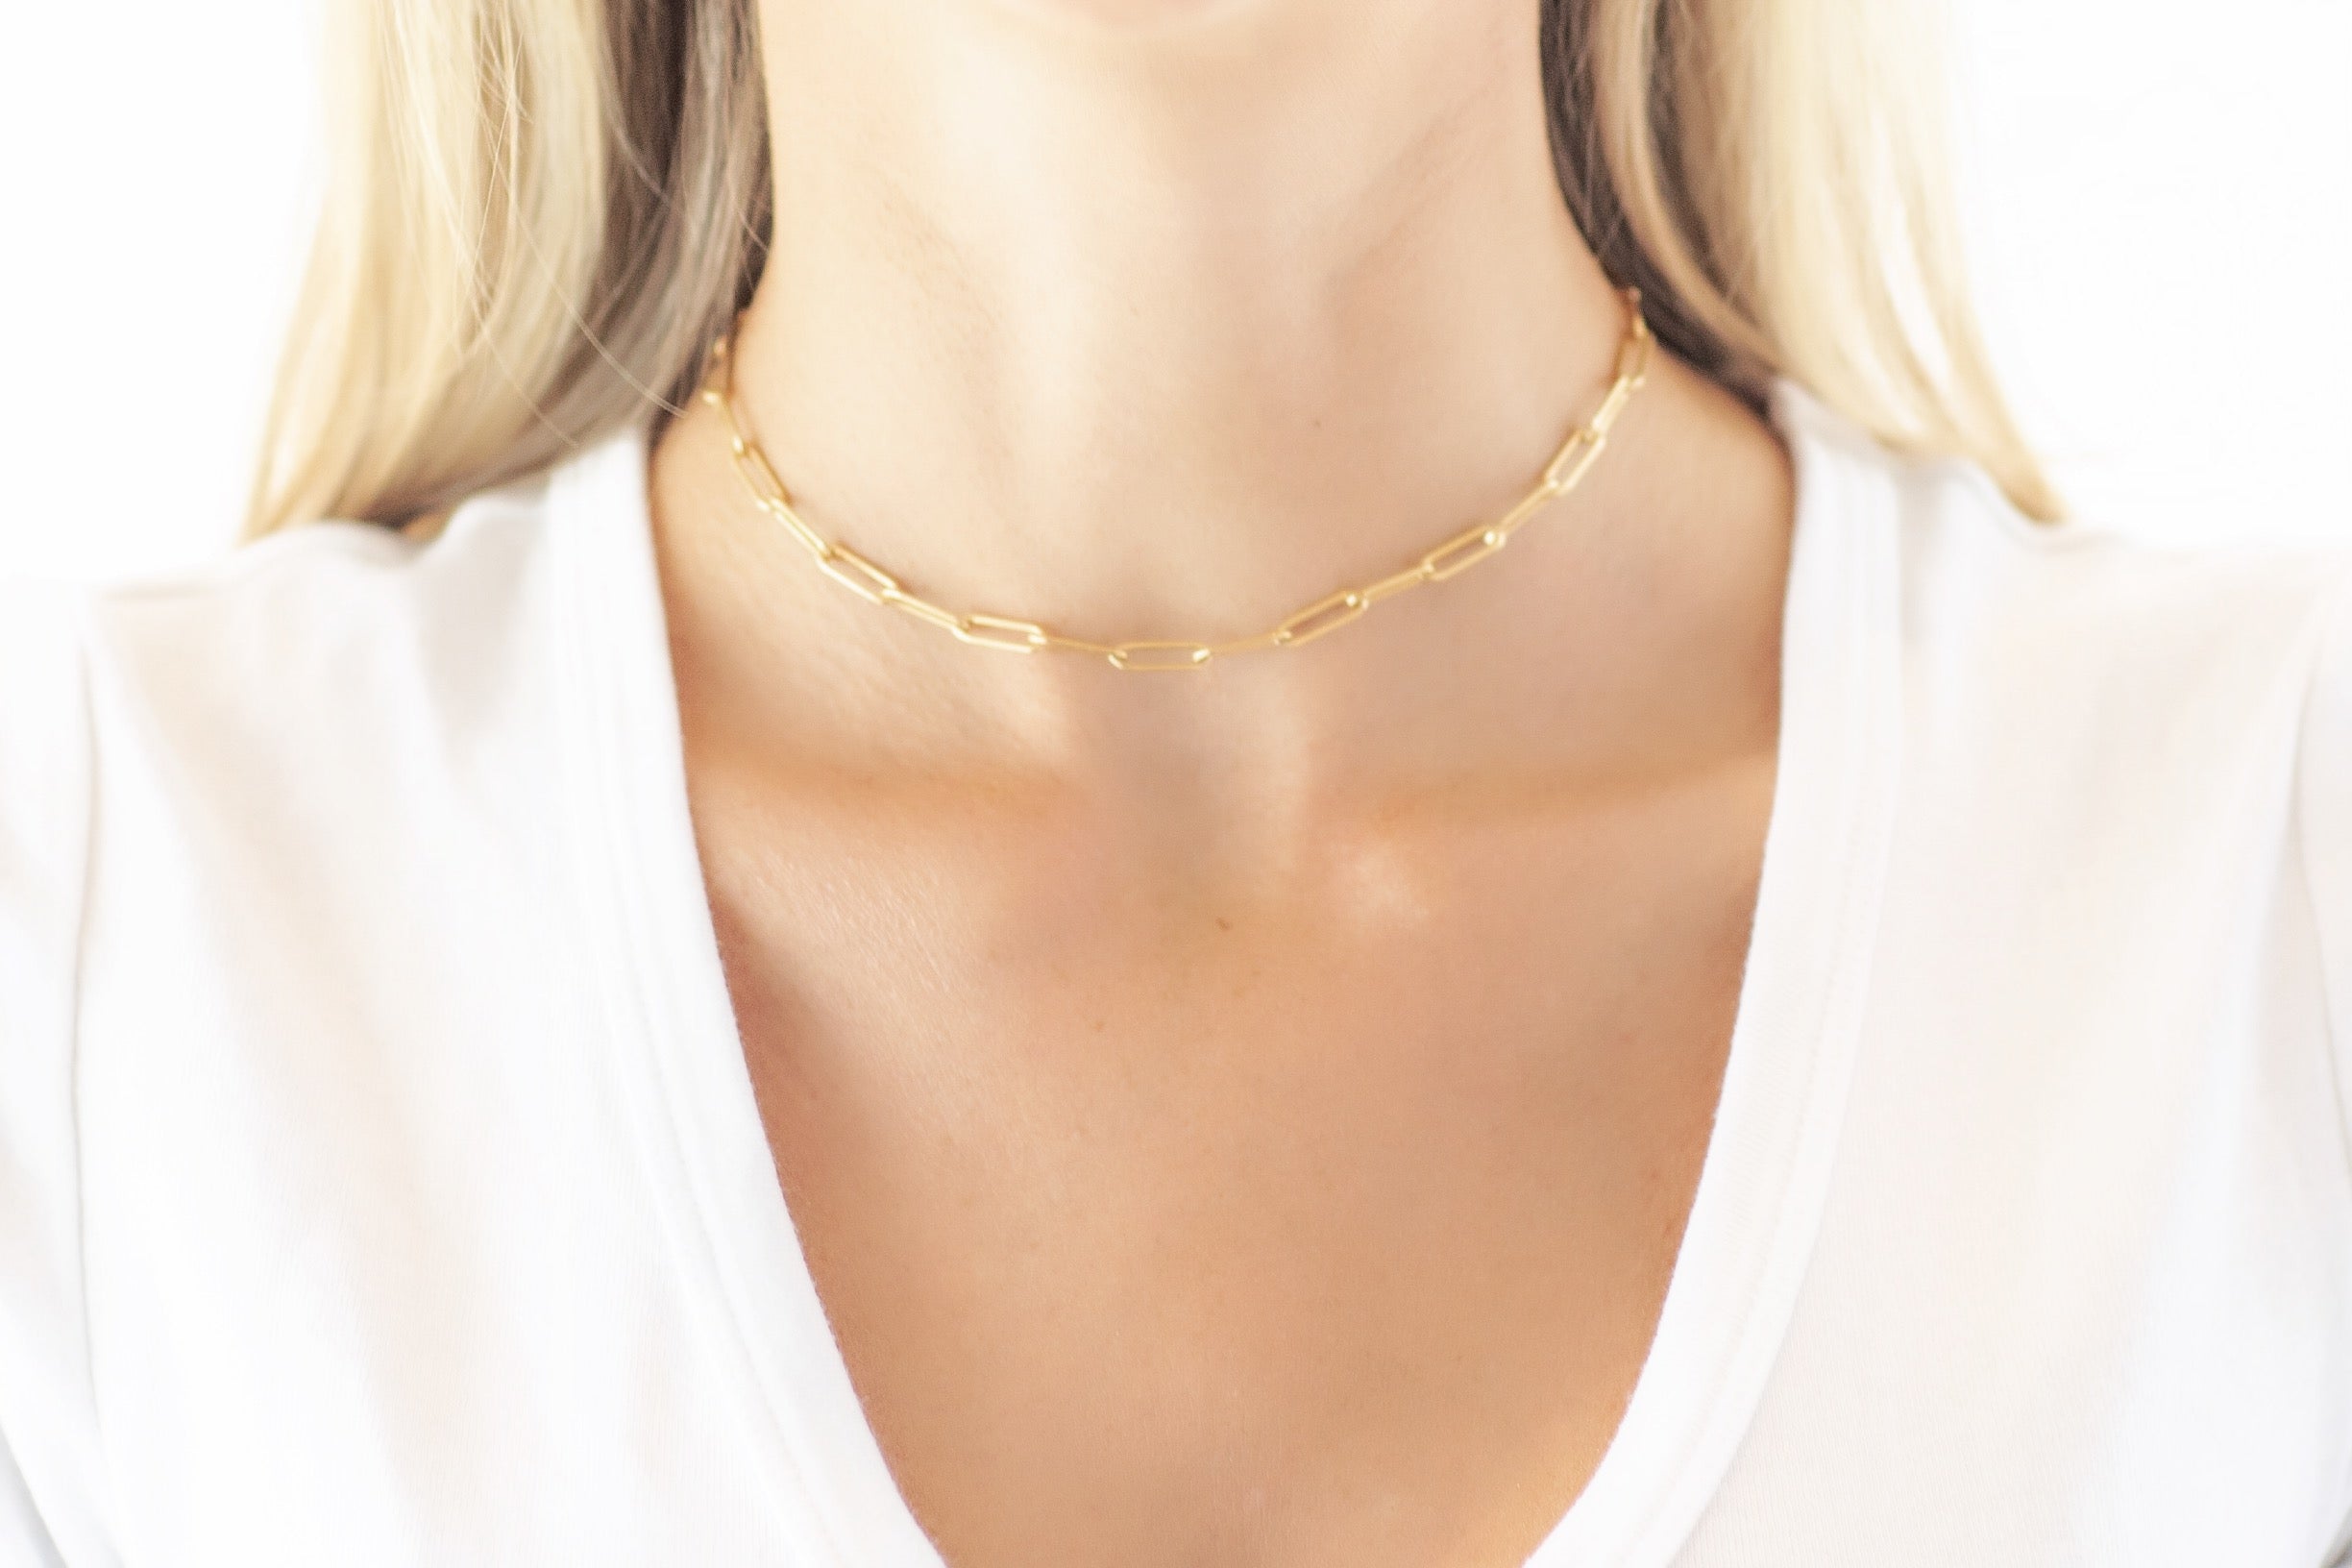 Chain Link Gold Necklace